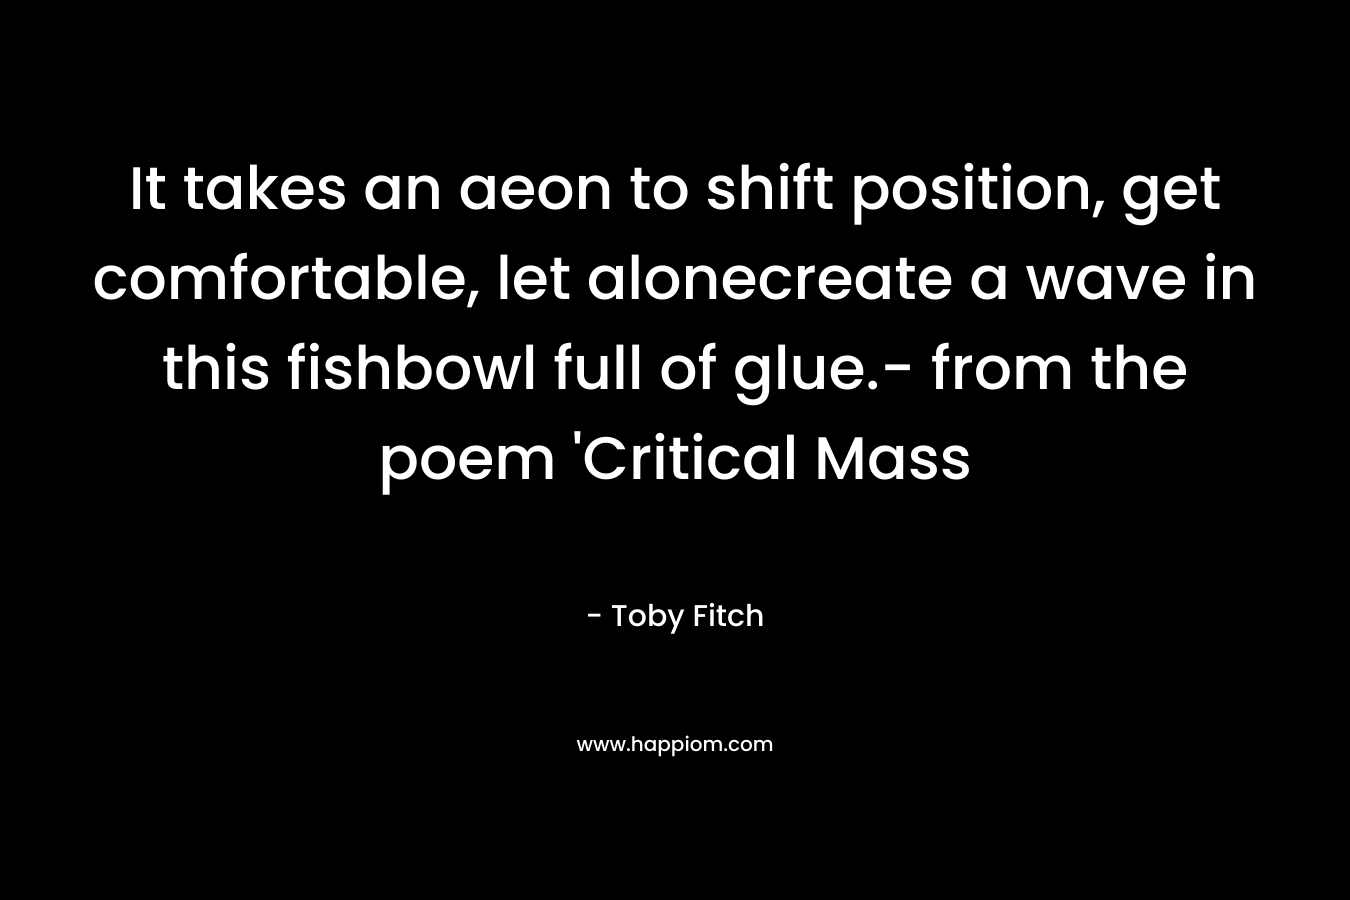 It takes an aeon to shift position, get comfortable, let alonecreate a wave in this fishbowl full of glue.- from the poem ‘Critical Mass – Toby Fitch